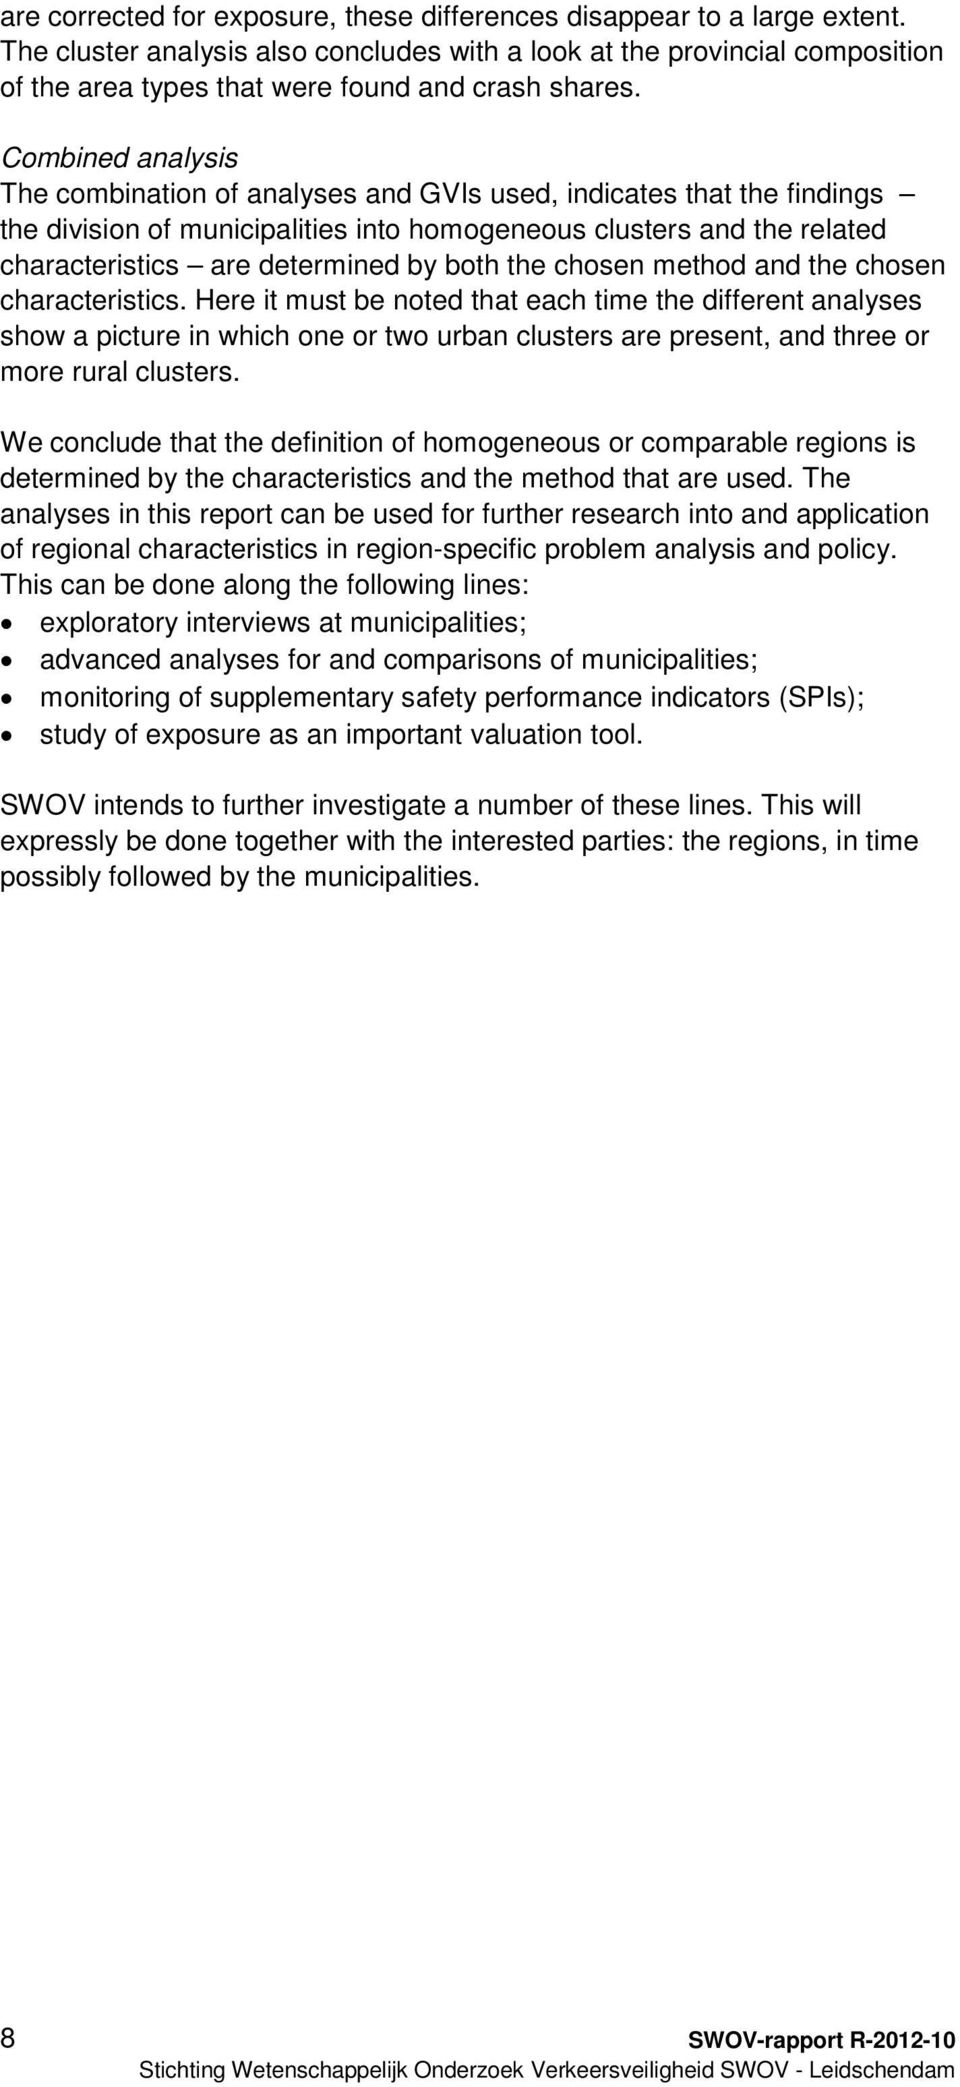 Combined analysis The combination of analyses and GVIs used, indicates that the findings the division of municipalities into homogeneous clusters and the related characteristics are determined by